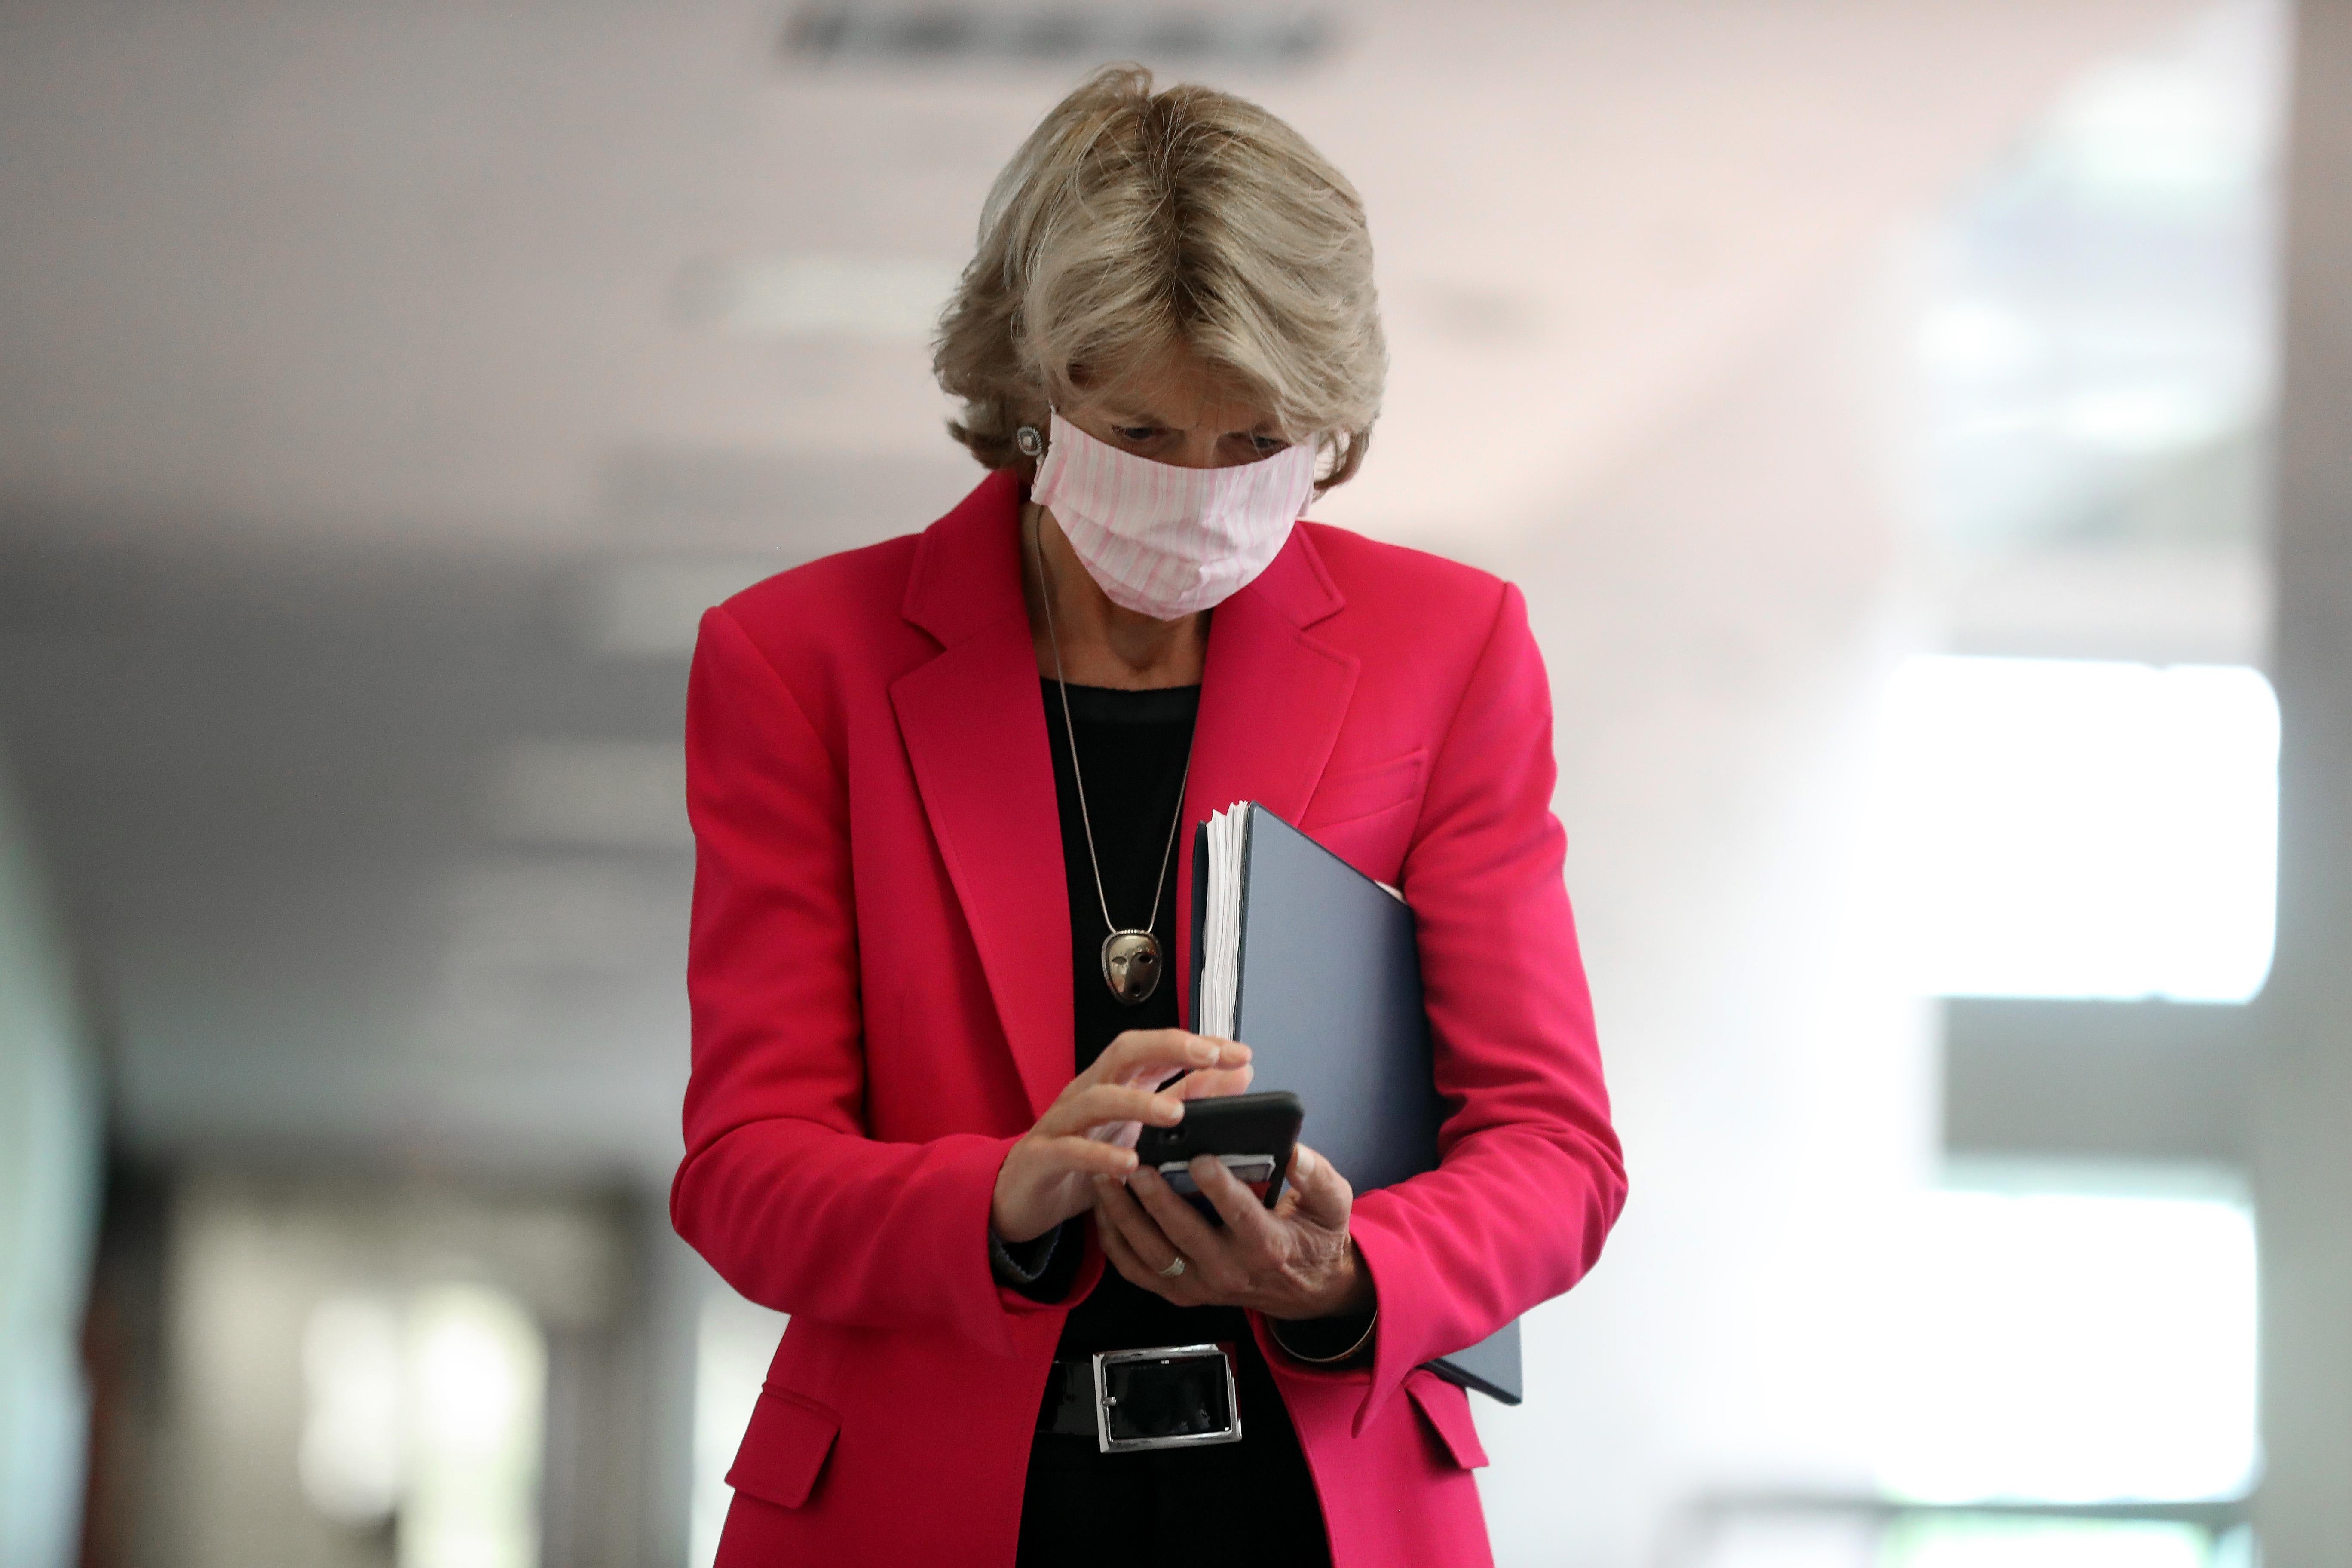 Lisa Murkowski, wearing a pink suit, looks down at her phone.